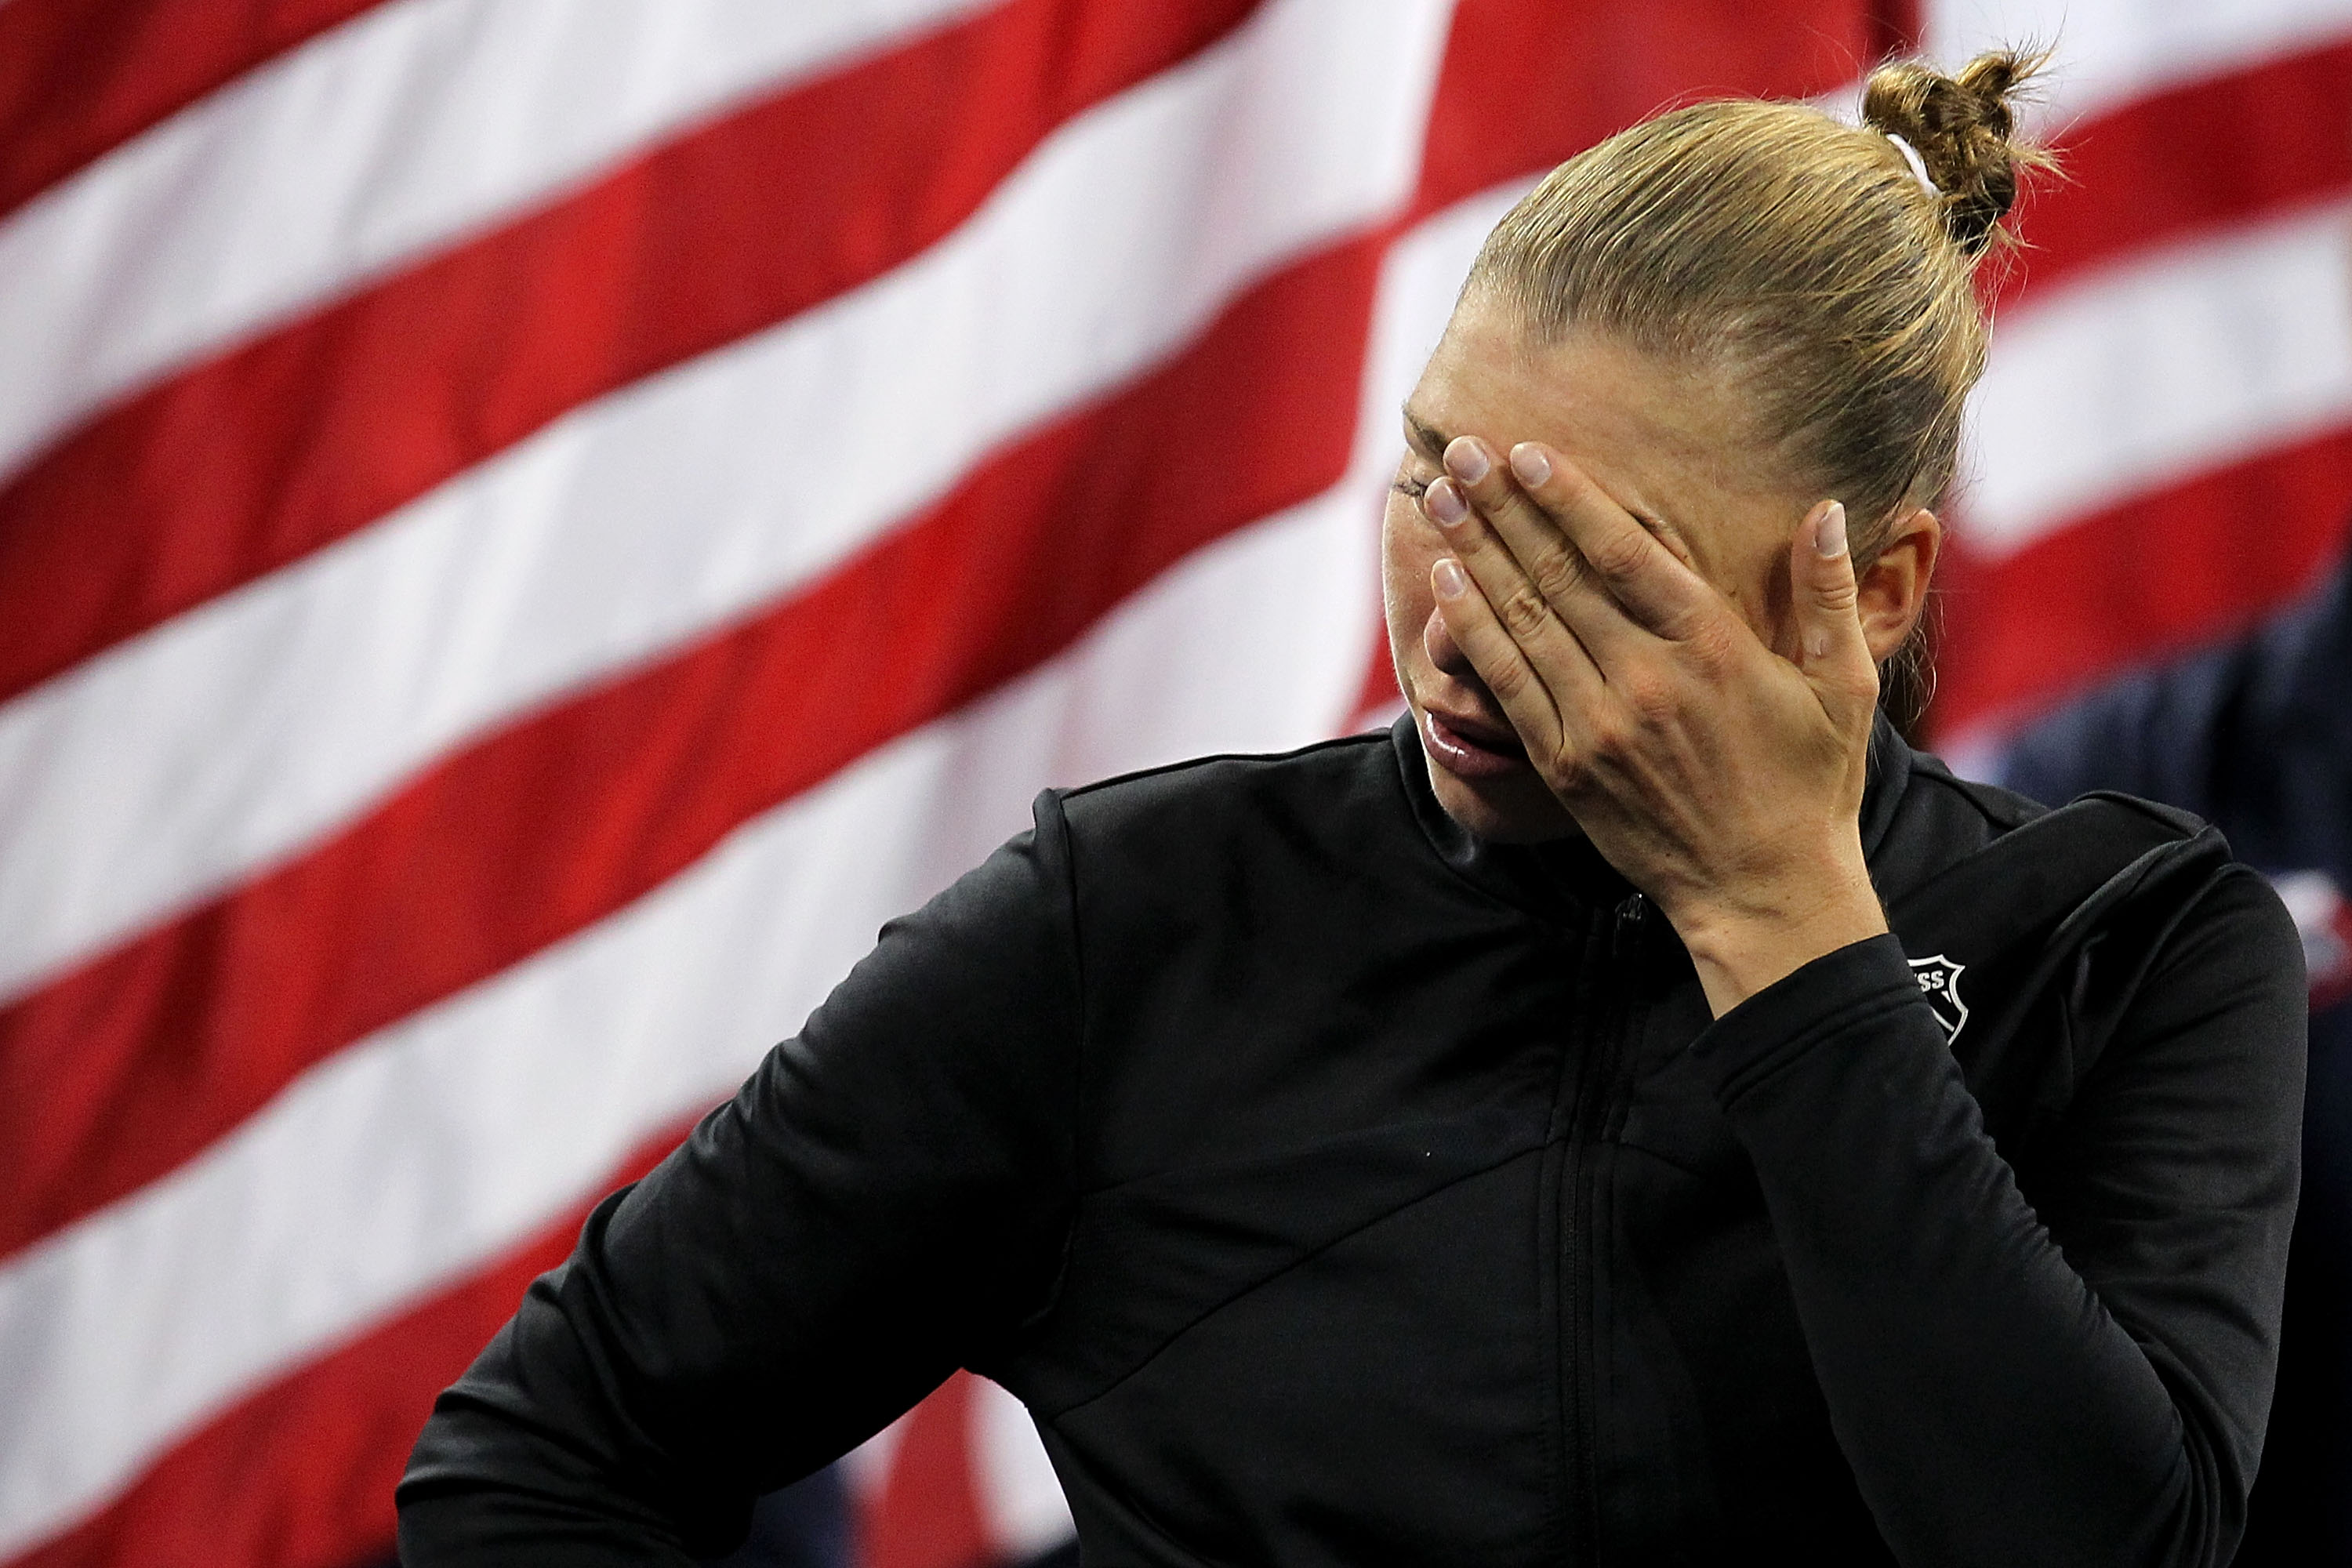 NEW YORK - SEPTEMBER 11:  Vera Zvonareva of Russia reacts during the trophy ceremony after being defeated by Kim Clijsters of Belgium during their women's singles final on day thirteen of the 2010 U.S. Open at the USTA Billie Jean King National Tennis Cen